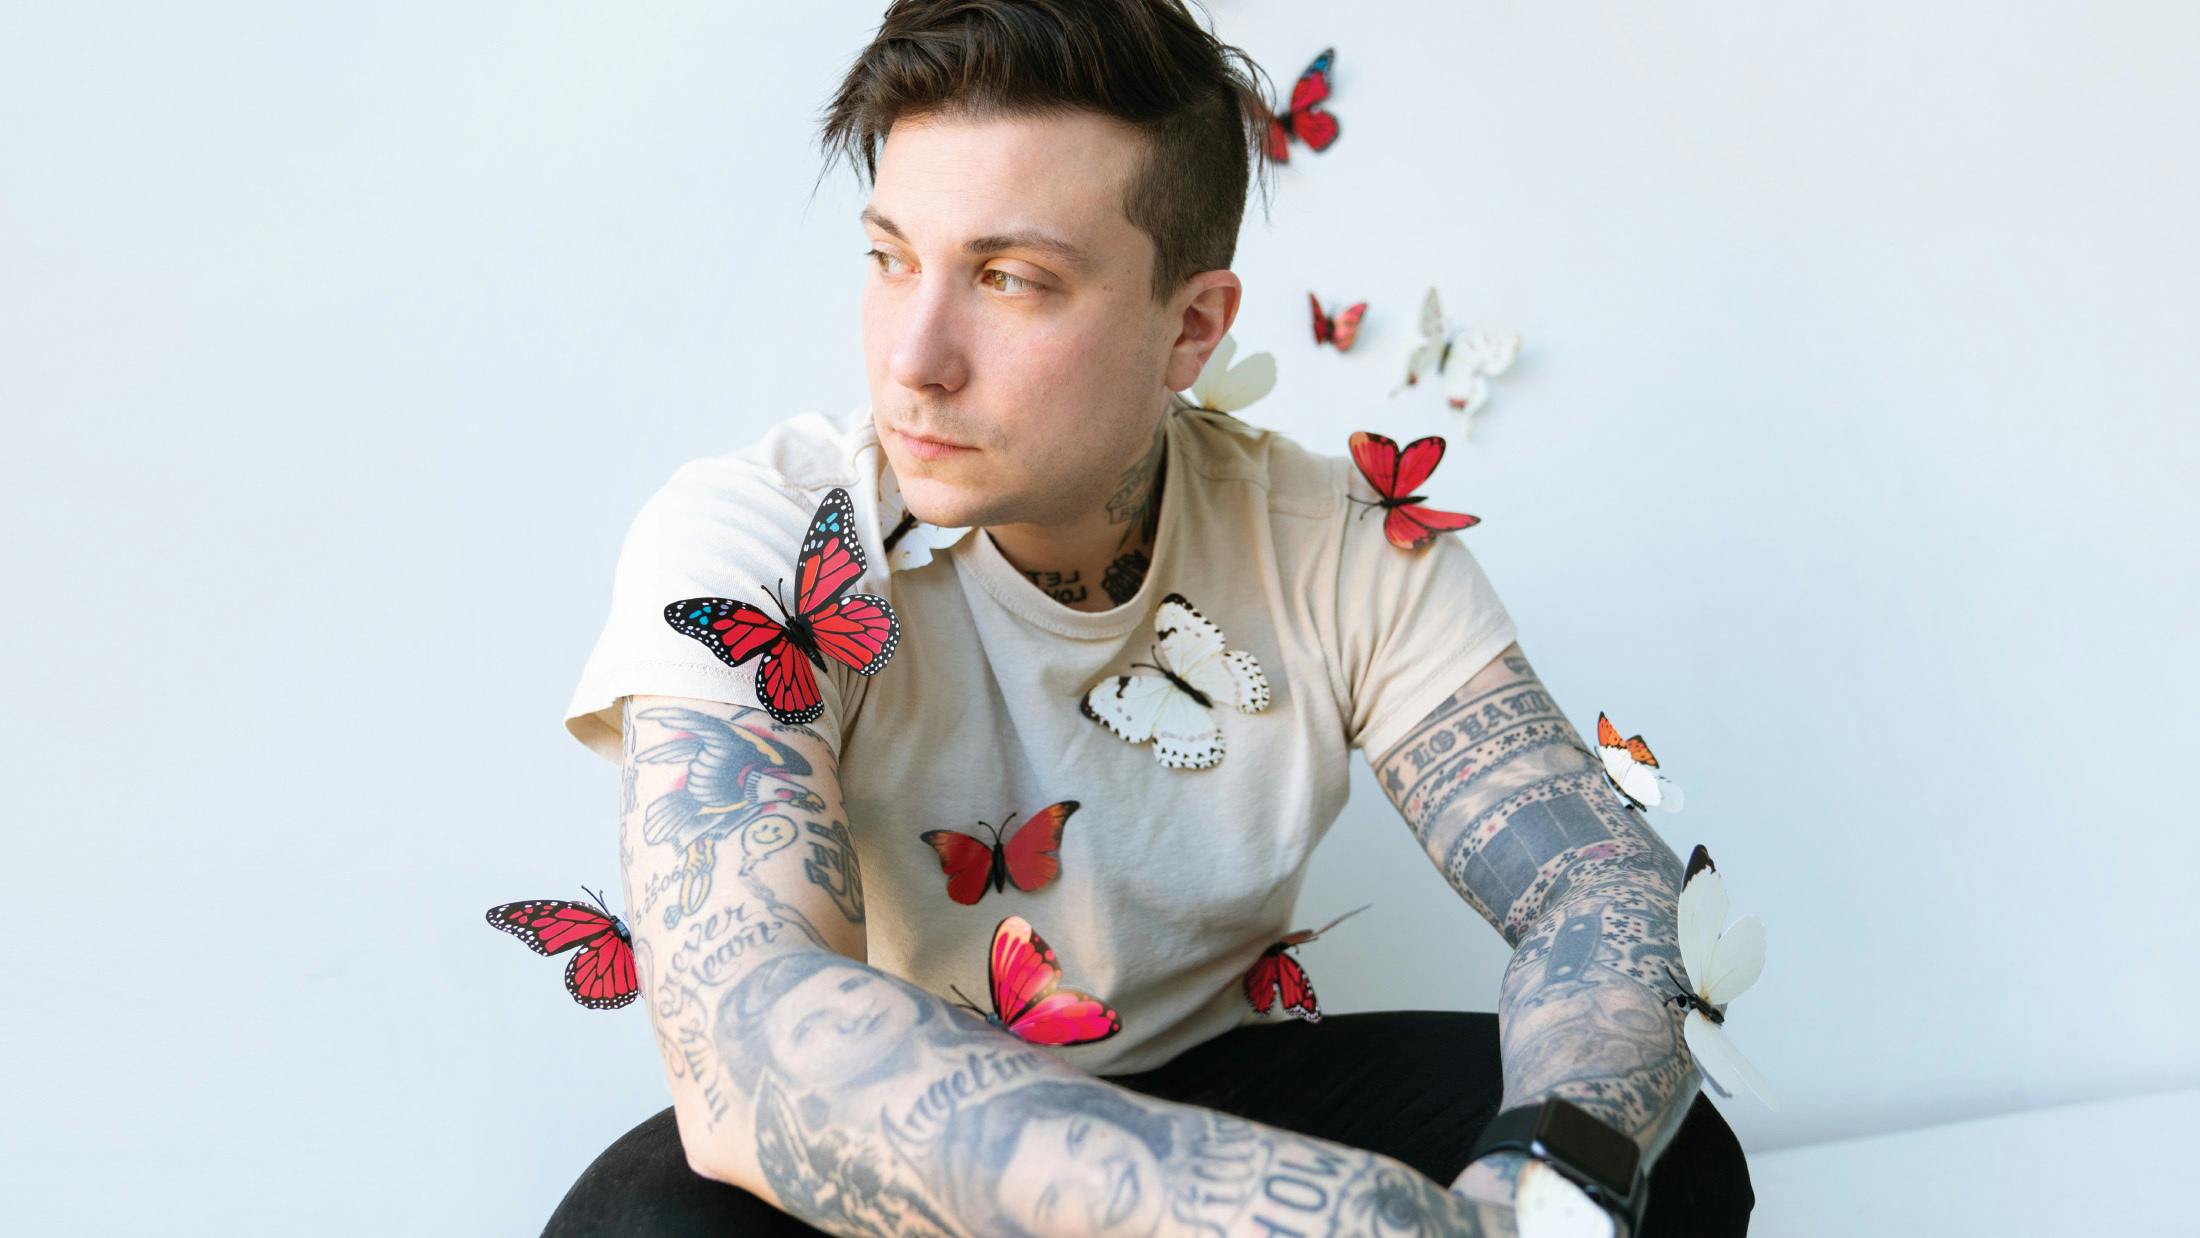 7 things you probably didn’t know about Frank Iero